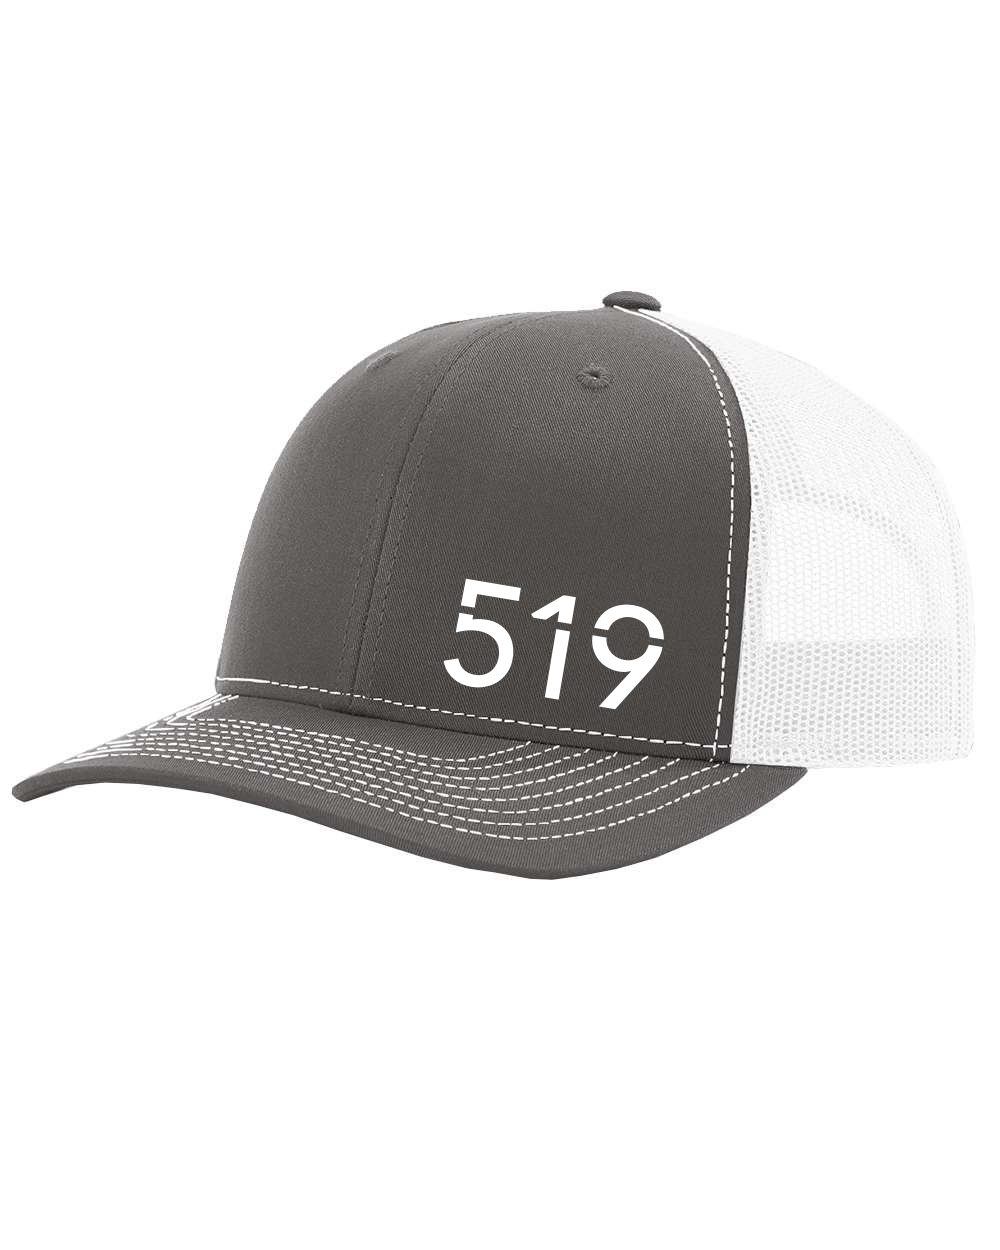 HAVE YOURSELF A NIGHT ADJUSTABLE SNAPBACK